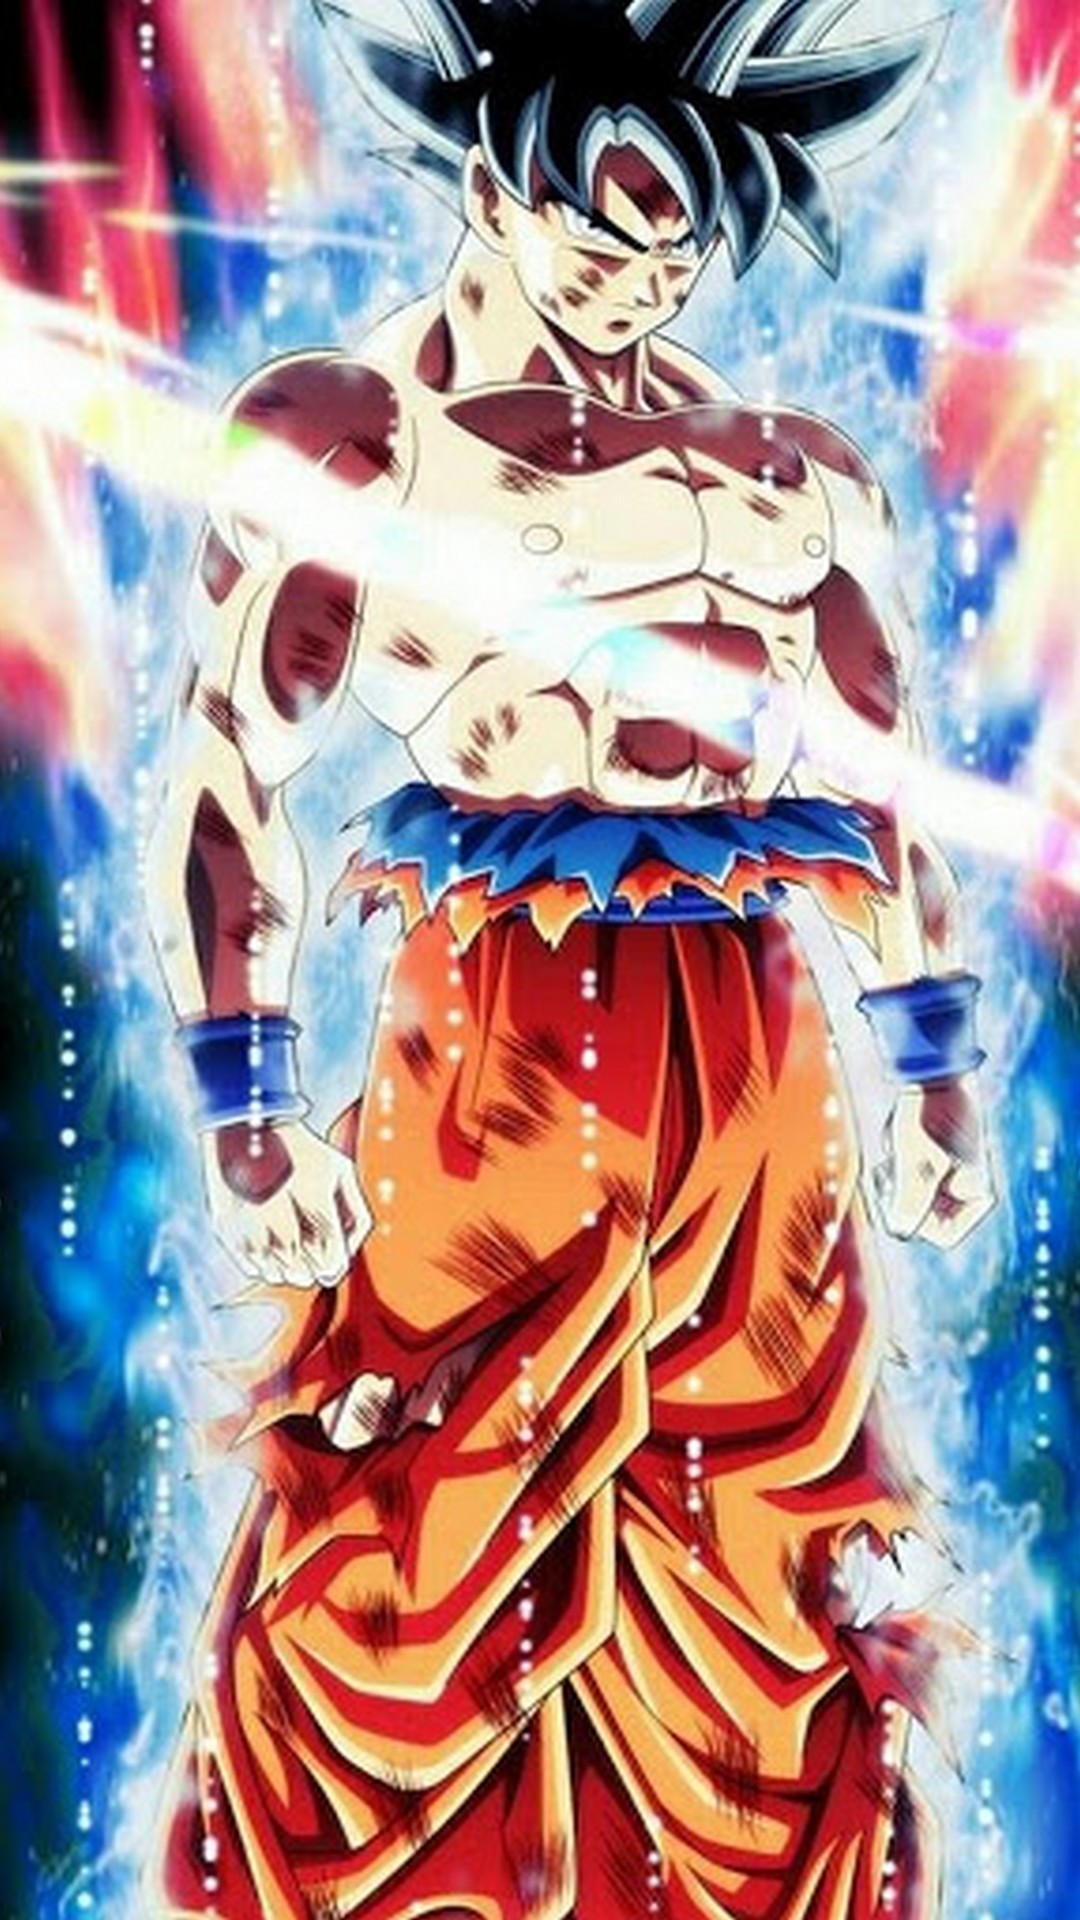 Wallpapers Goku Imagenes with resolution 1080X1920 pixel. You can make this wallpaper for your iPhone 5, 6, 7, 8, X backgrounds, Mobile Screensaver, or iPad Lock Screen